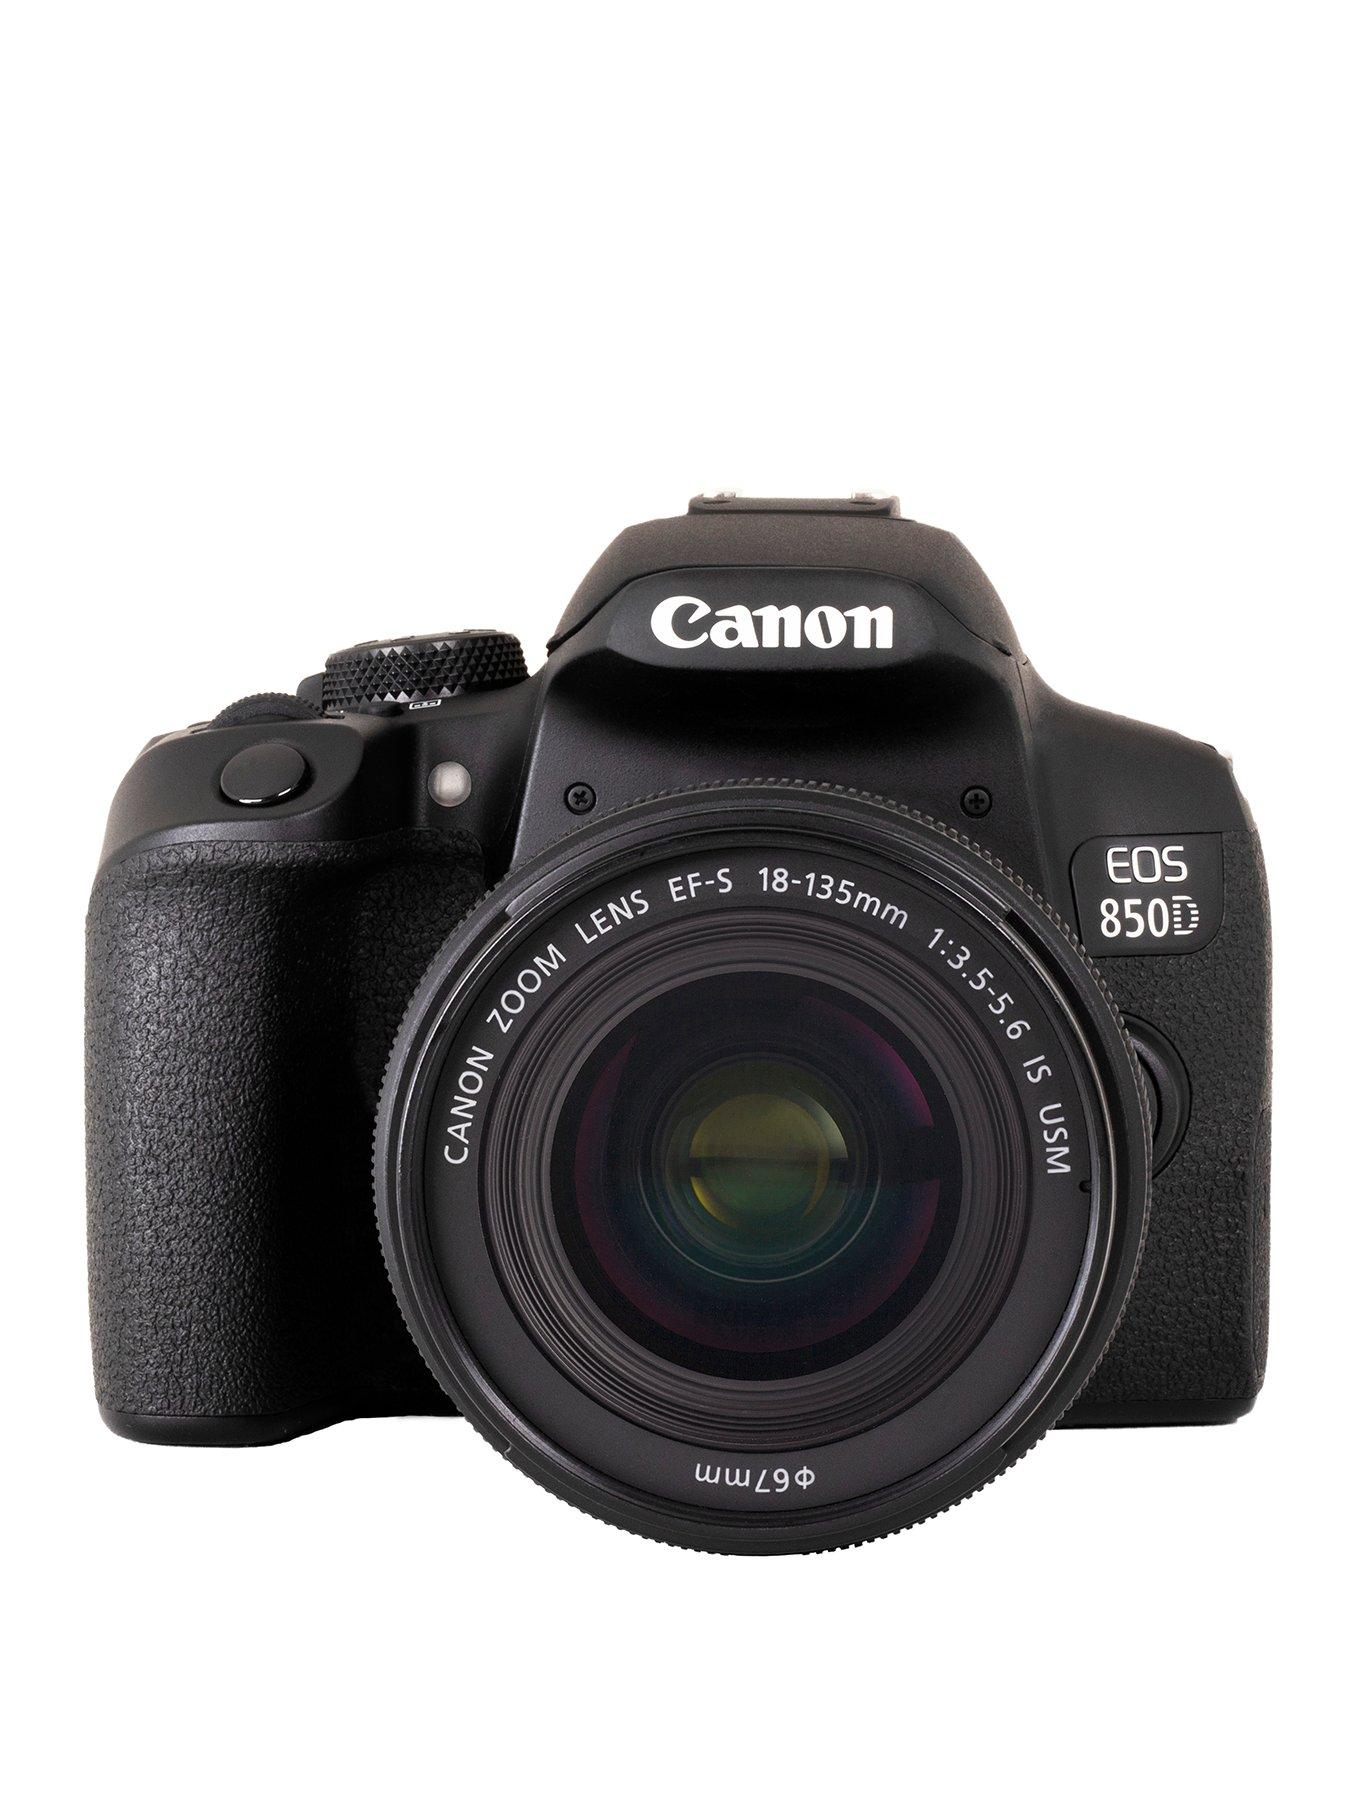 Canon EOS 2000D DSLR Camera with EF-S 18-55 mm f/3.5-5.6